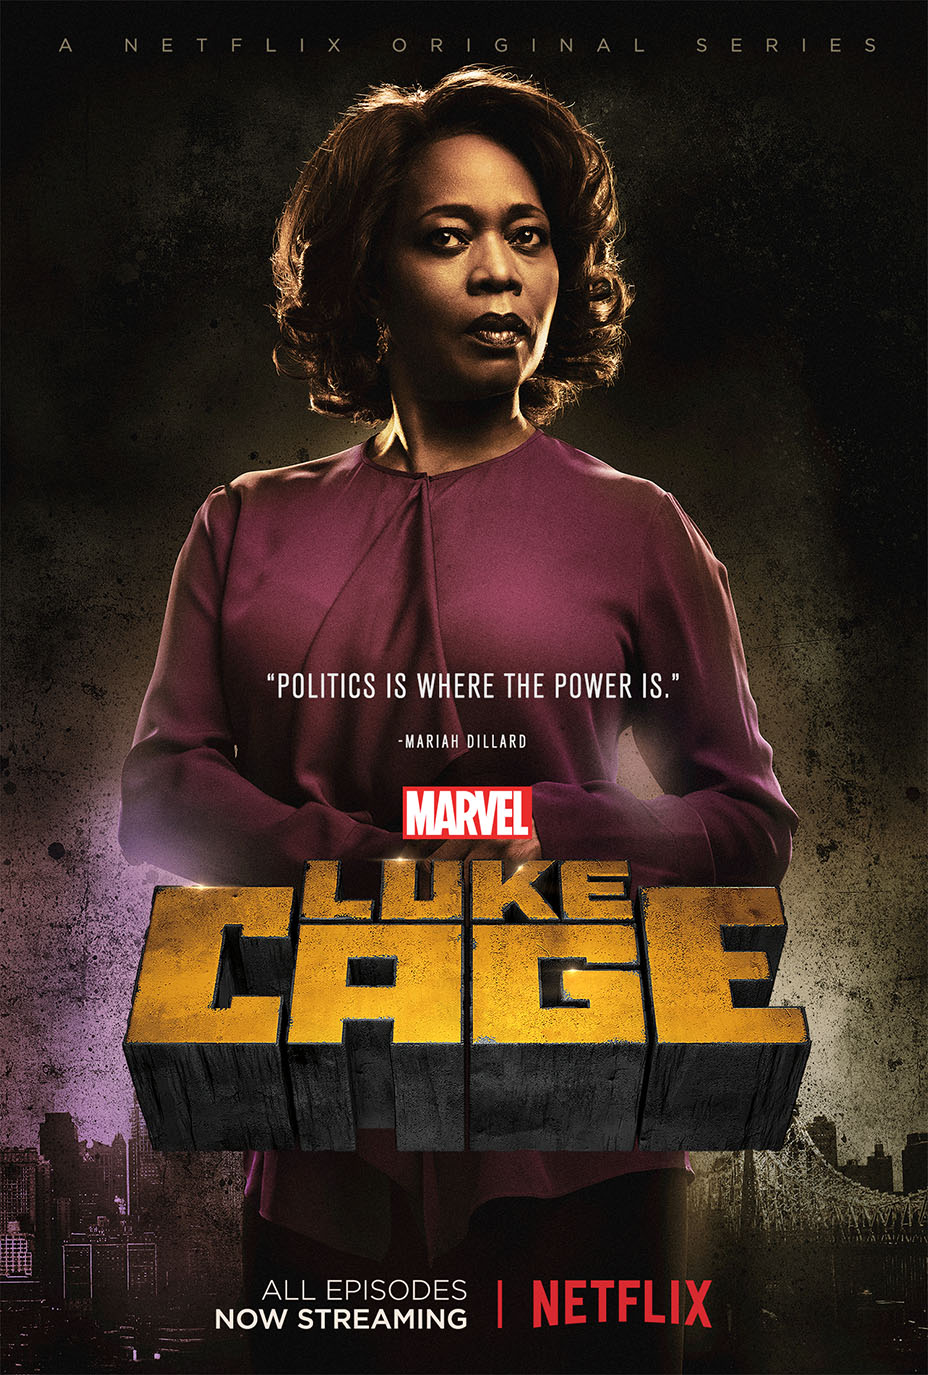 New Luke Cage Posters for Shades Alvarez, Mariah Dillard and Cottonmouth